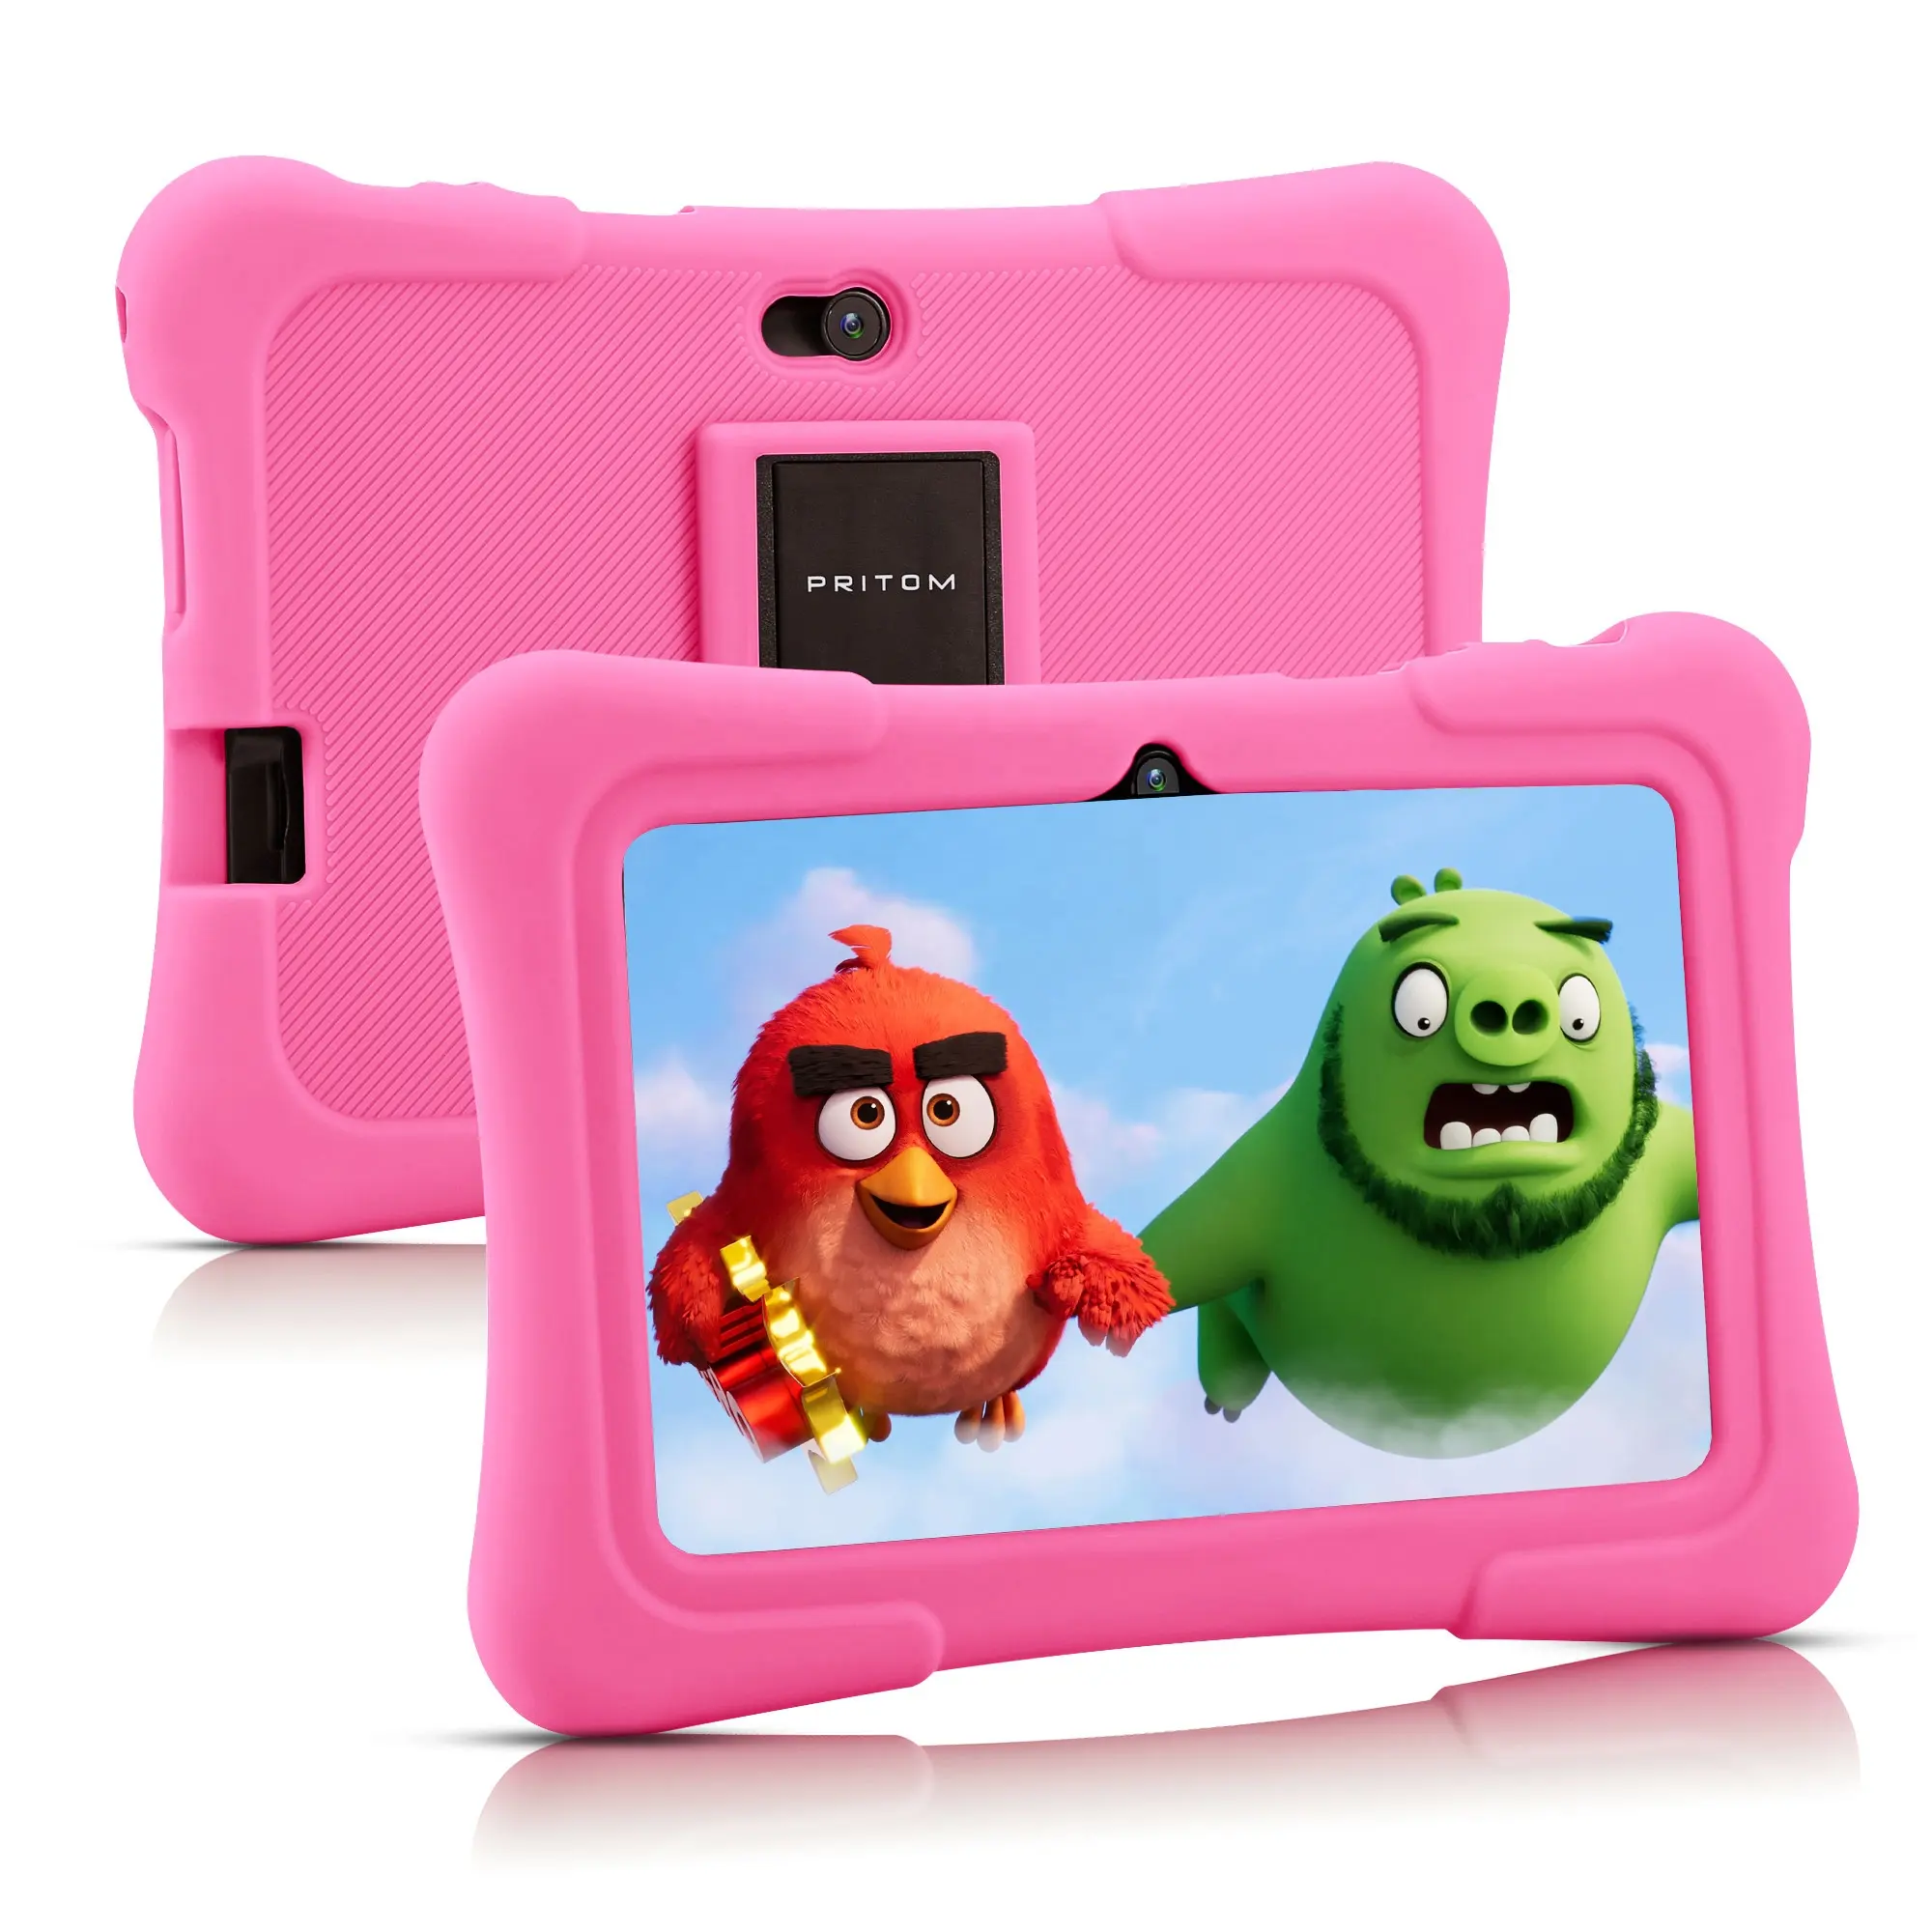 kids tablet 7 inch children education Quad core tablet pc with silicon case protection for kids